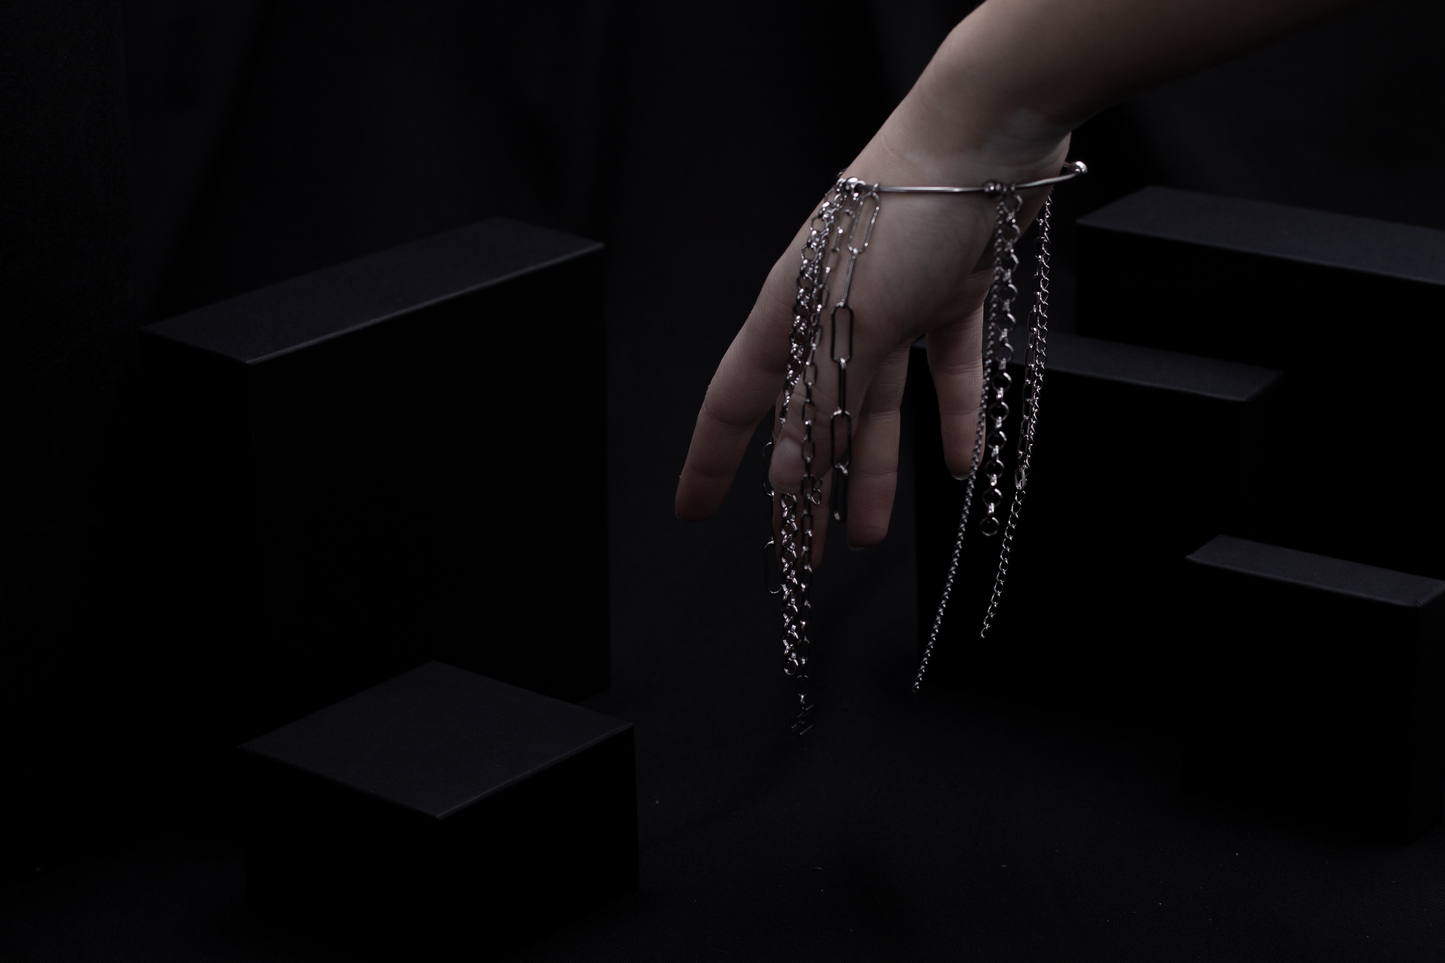 On a model’s wrist against a dark backdrop is a Myril Jewels rigid bracelet with hanging chains, reflecting a sleek neo-goth aesthetic. This stylish piece bridges the gap between boldness and minimalism, suitable for gothic, whimsigoth, and everyday wear, and perfect as a distinctive gift.